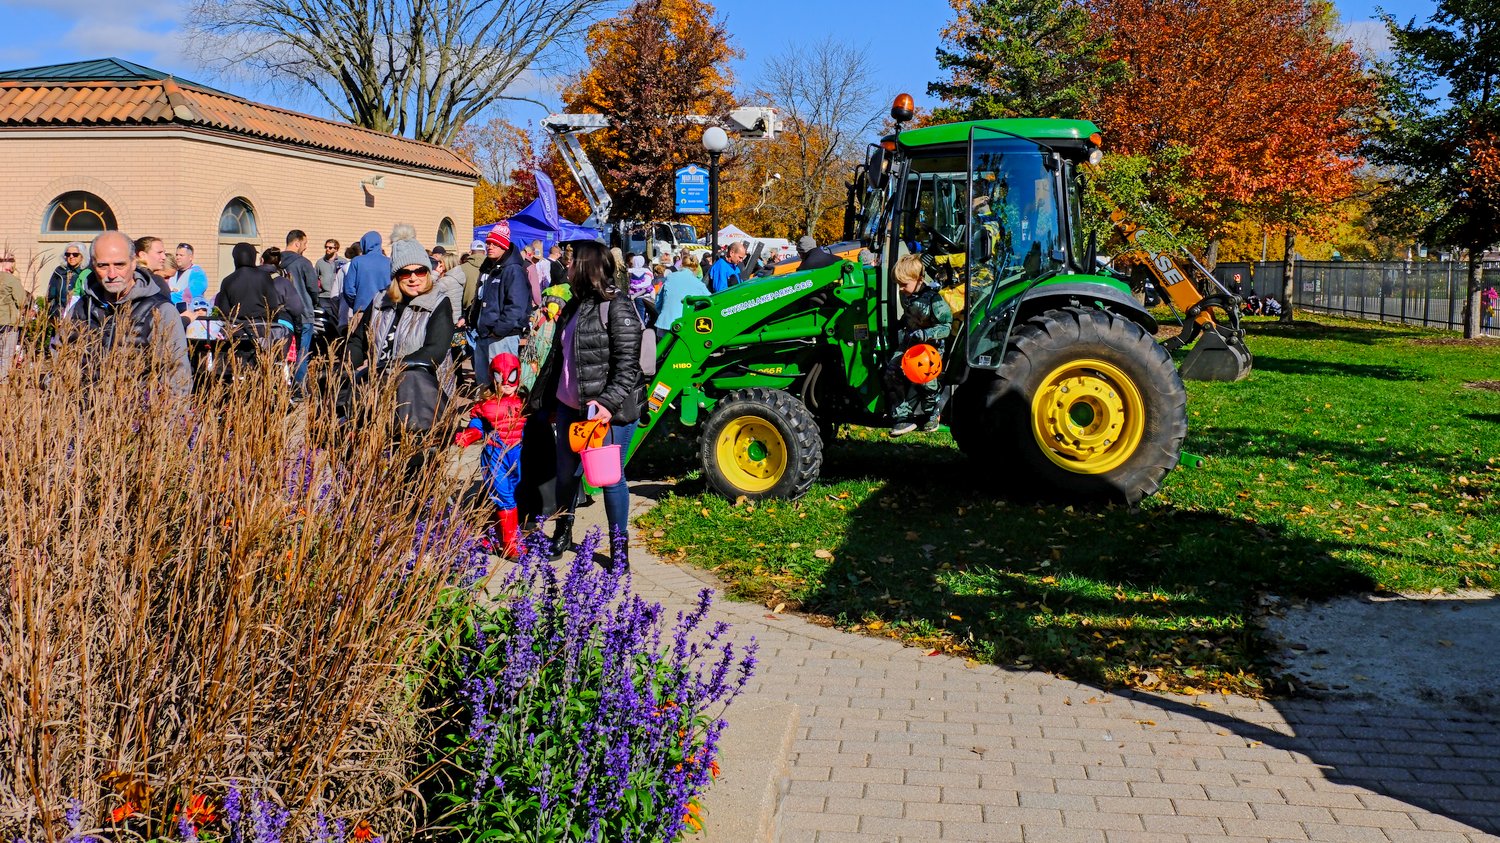 Trick or treater checking out one of the tractors.